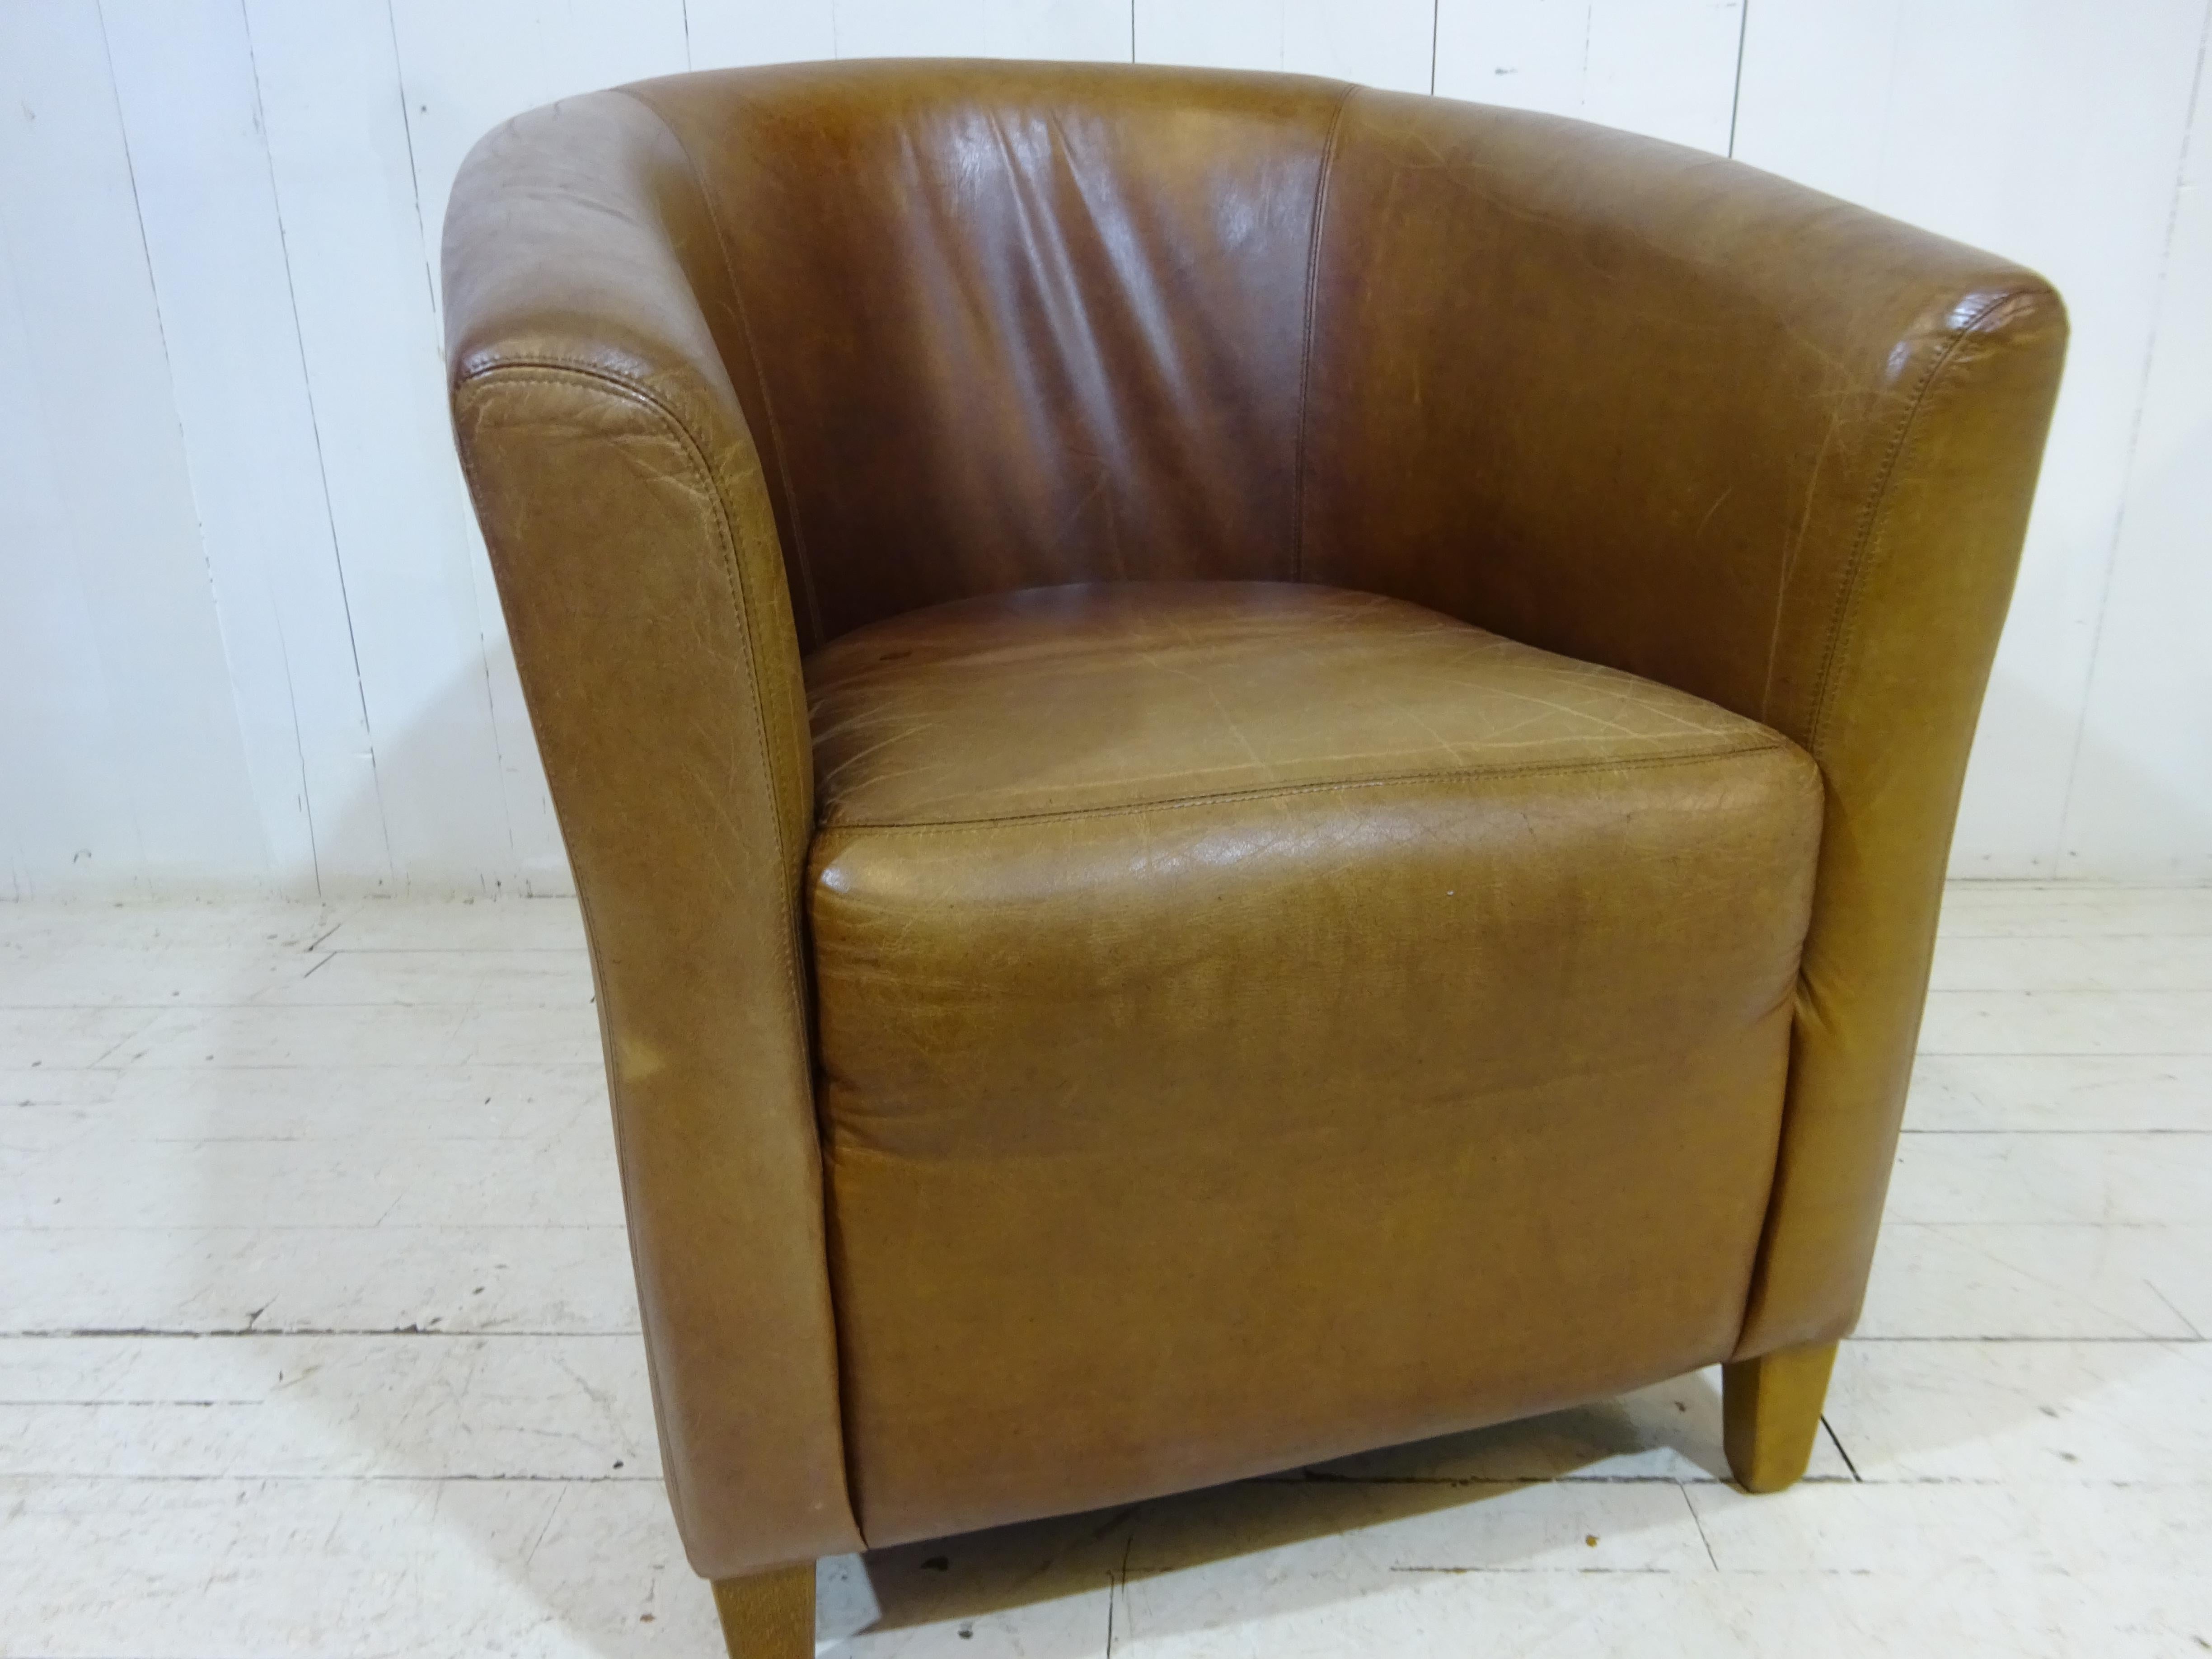 Retro Hotel Tub Chair in Distressed Tan Leather 1